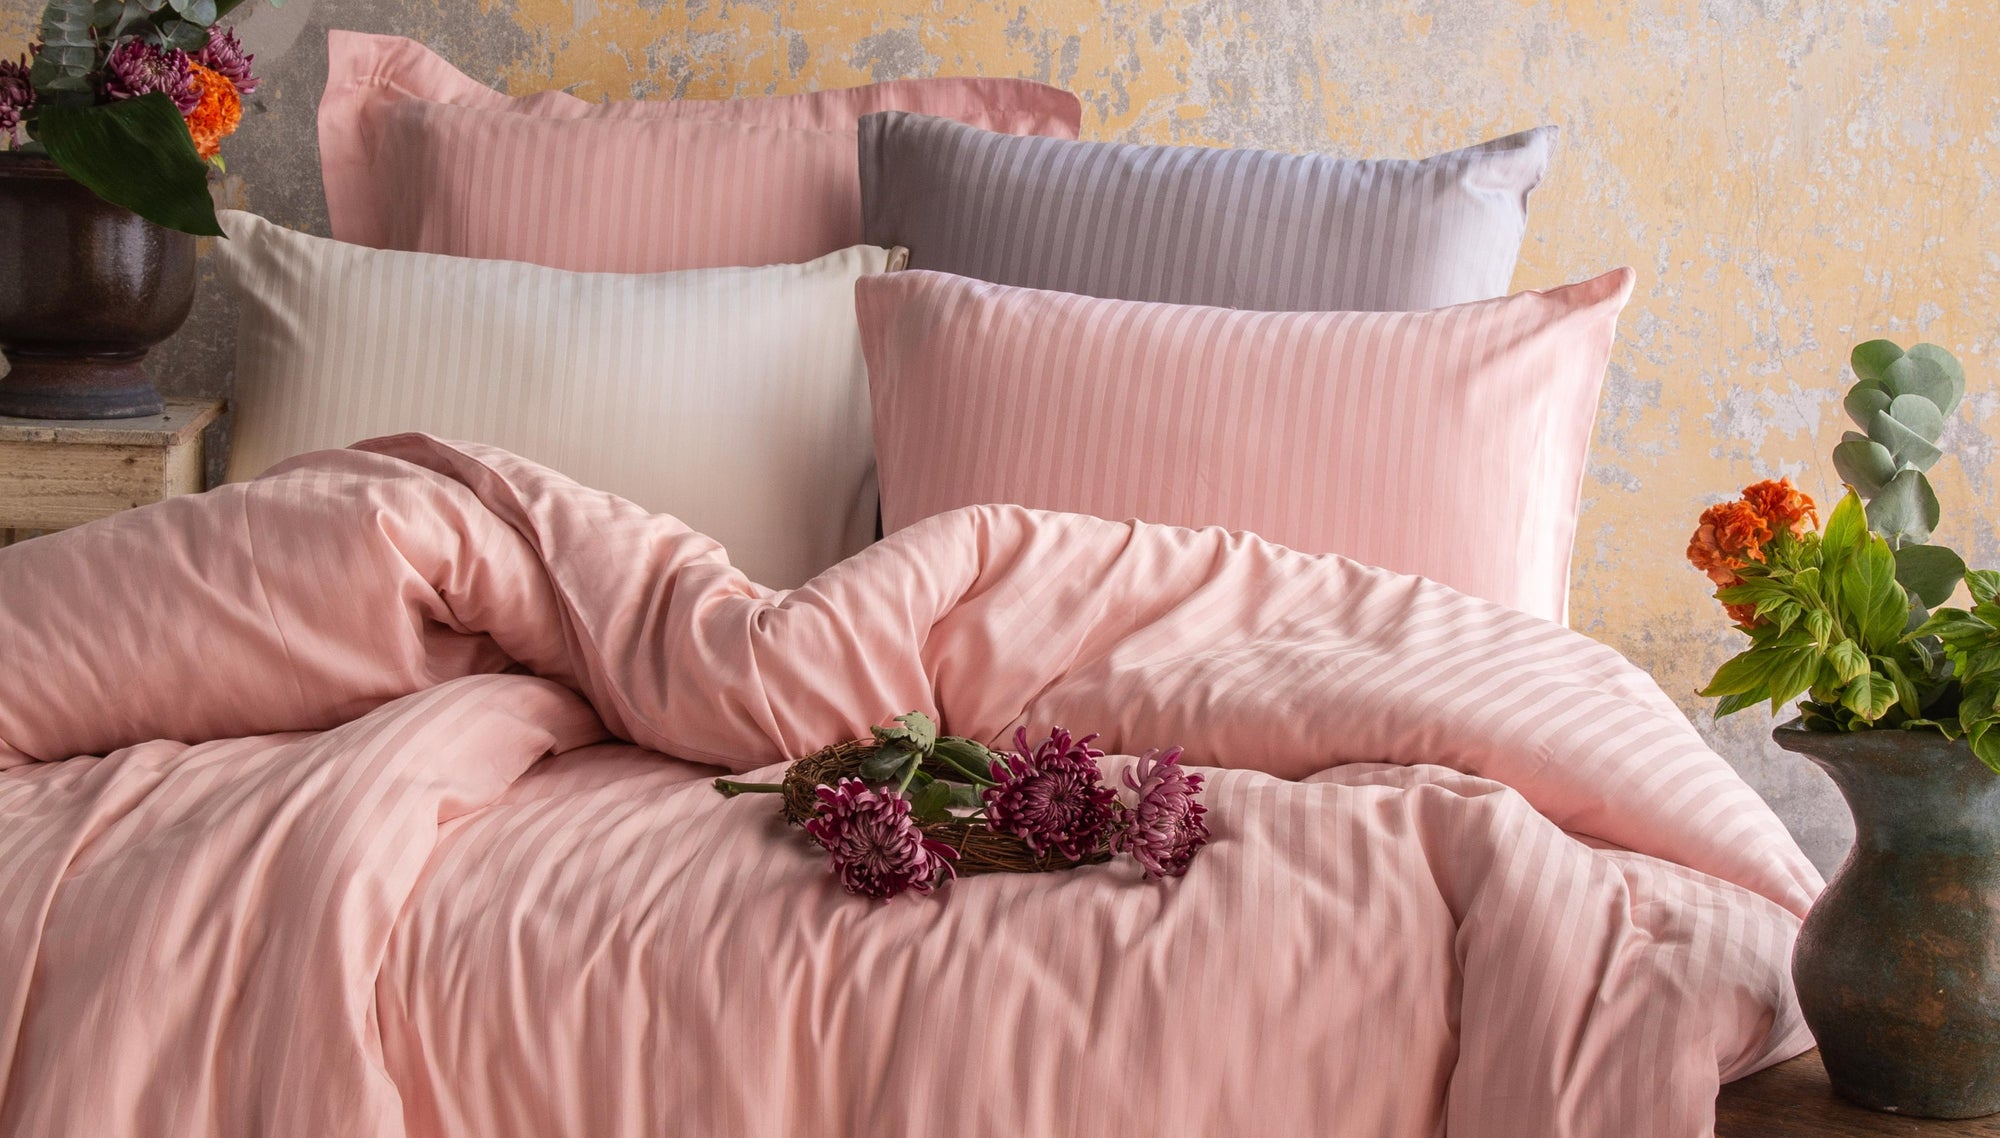 Cotton Sateen Linens & Bedding Collection by Leruum London